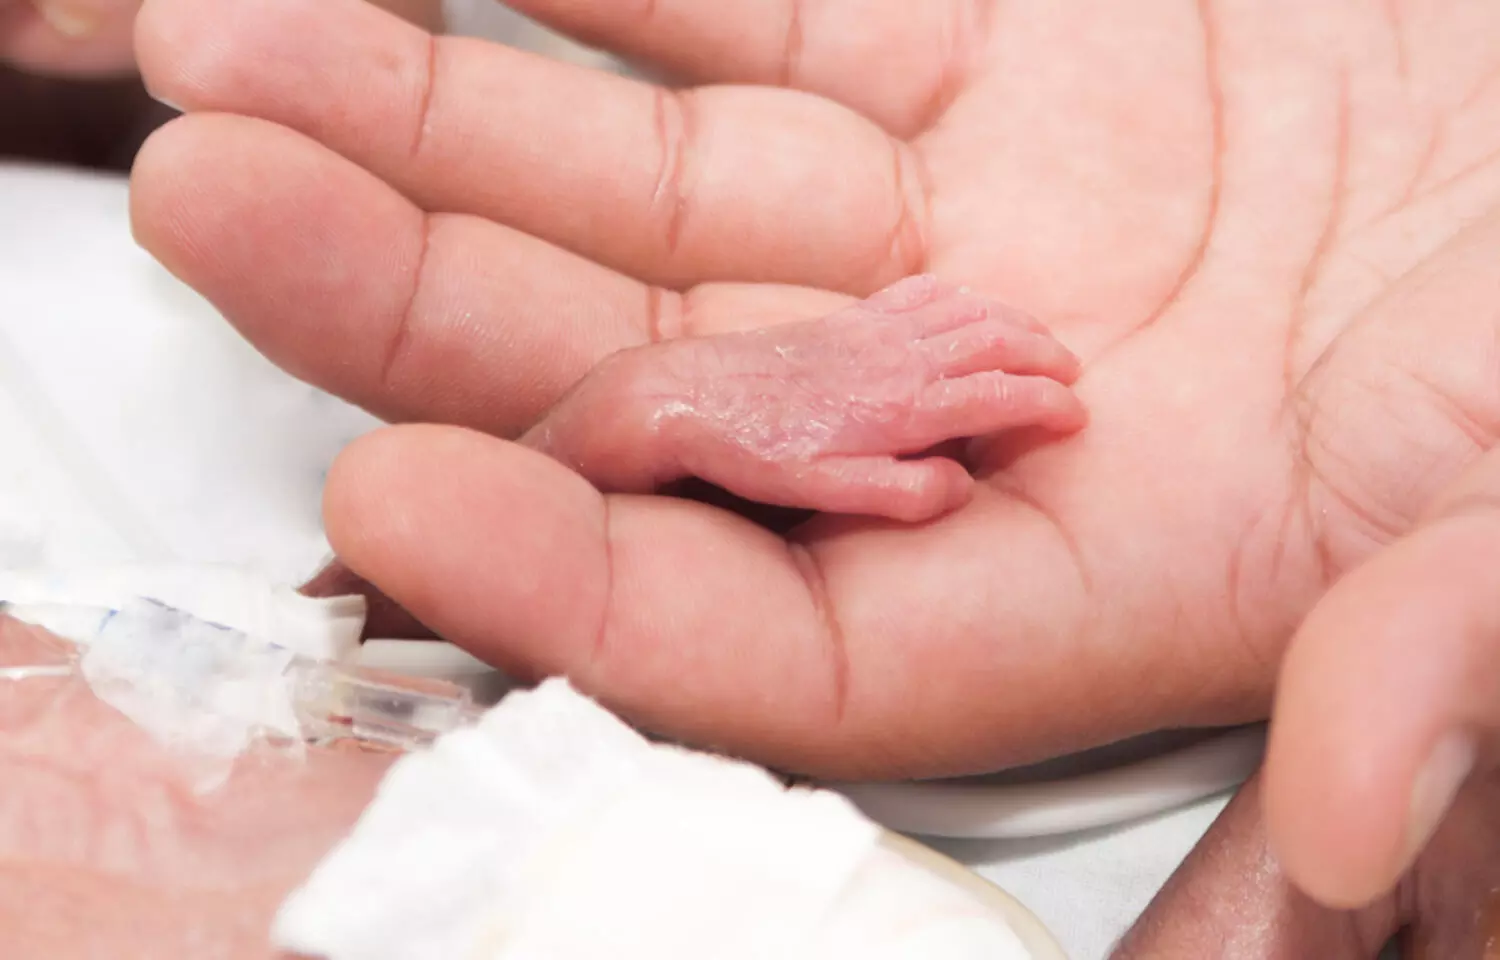 Delaying umbilical cord clamping saves babies lives, confirms Lancet study